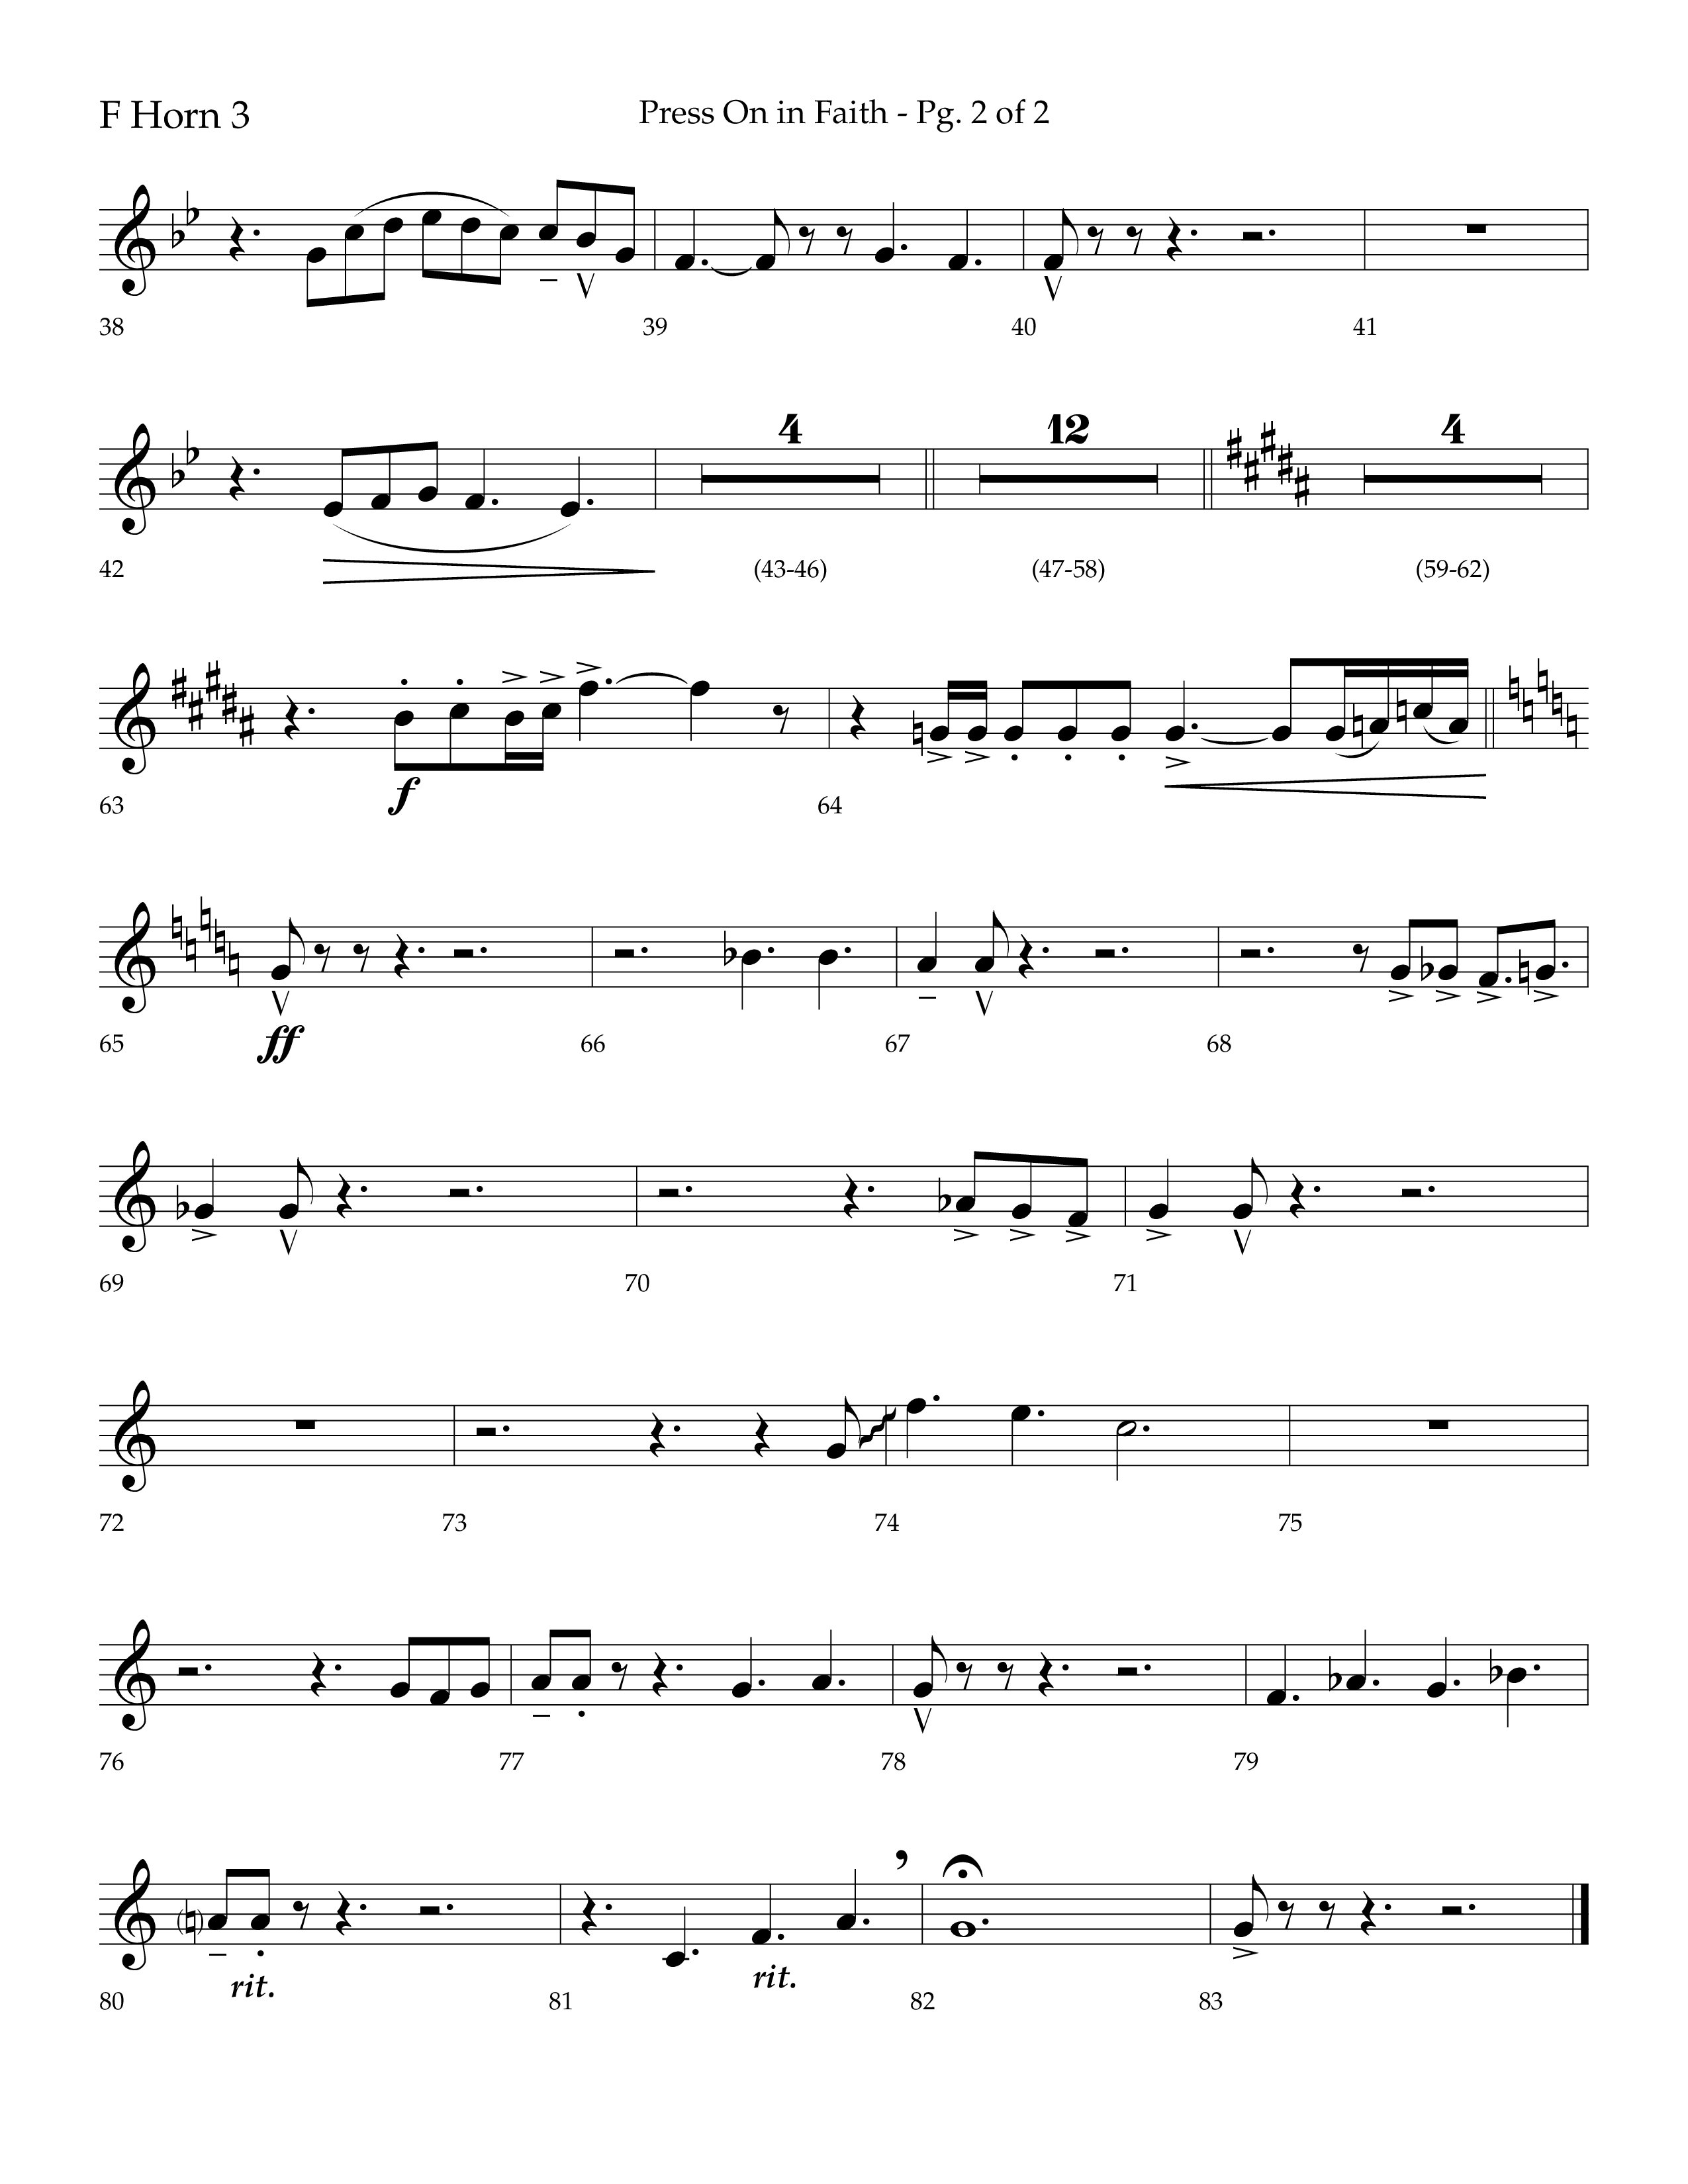 Press On In Faith with We’ve Come This Far By Faith Choral Anthem SATB French Horn 3 (Lifeway Choral / Orch. Bradley Knight)